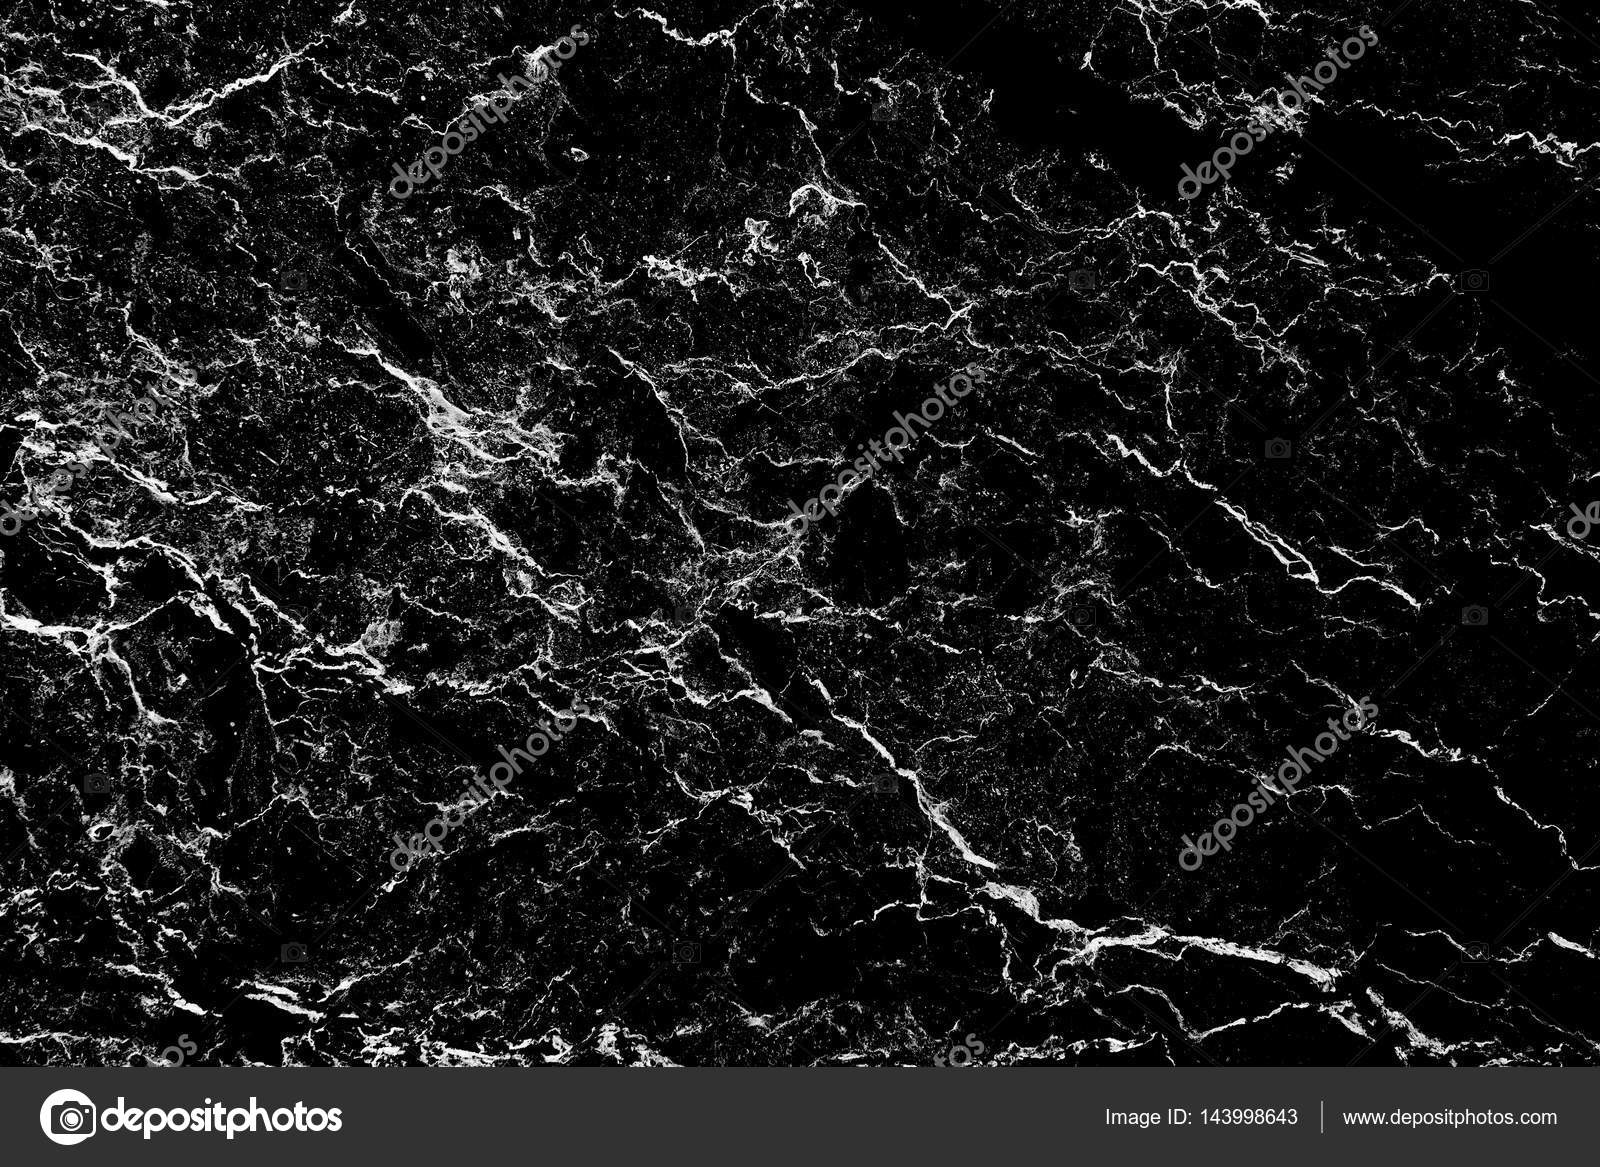 Black marble background stone texture pattern nature (with high resolution)  Stock Photo by ©asaneephoto 143998643